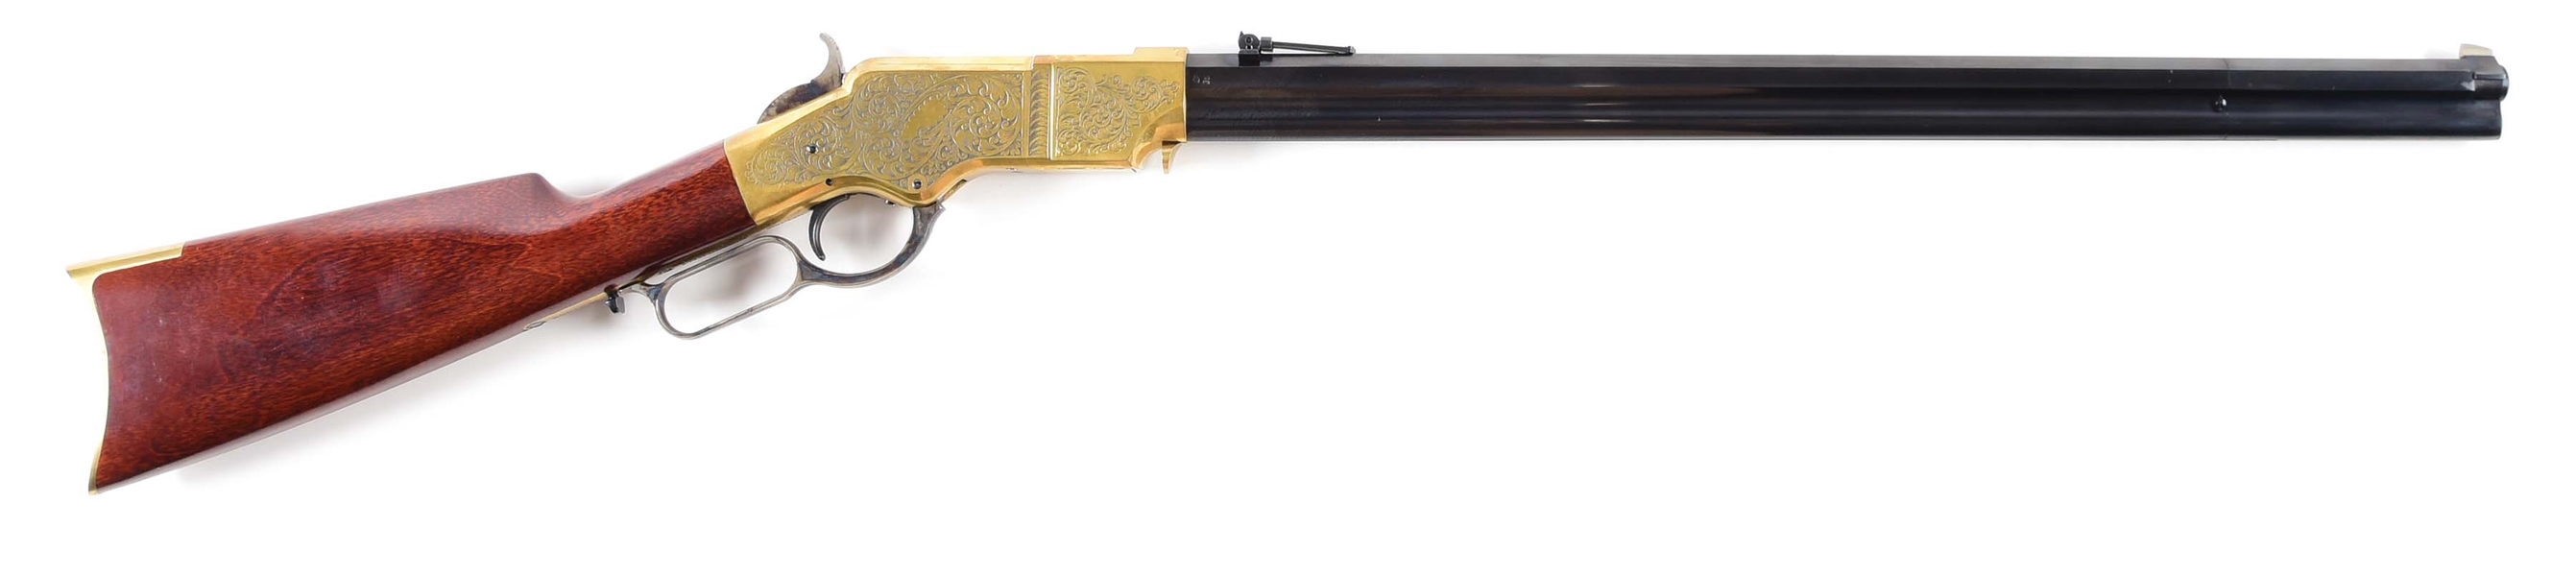 (M) UBERTI 1860 HENRY LEVER ACTION RIFLE.